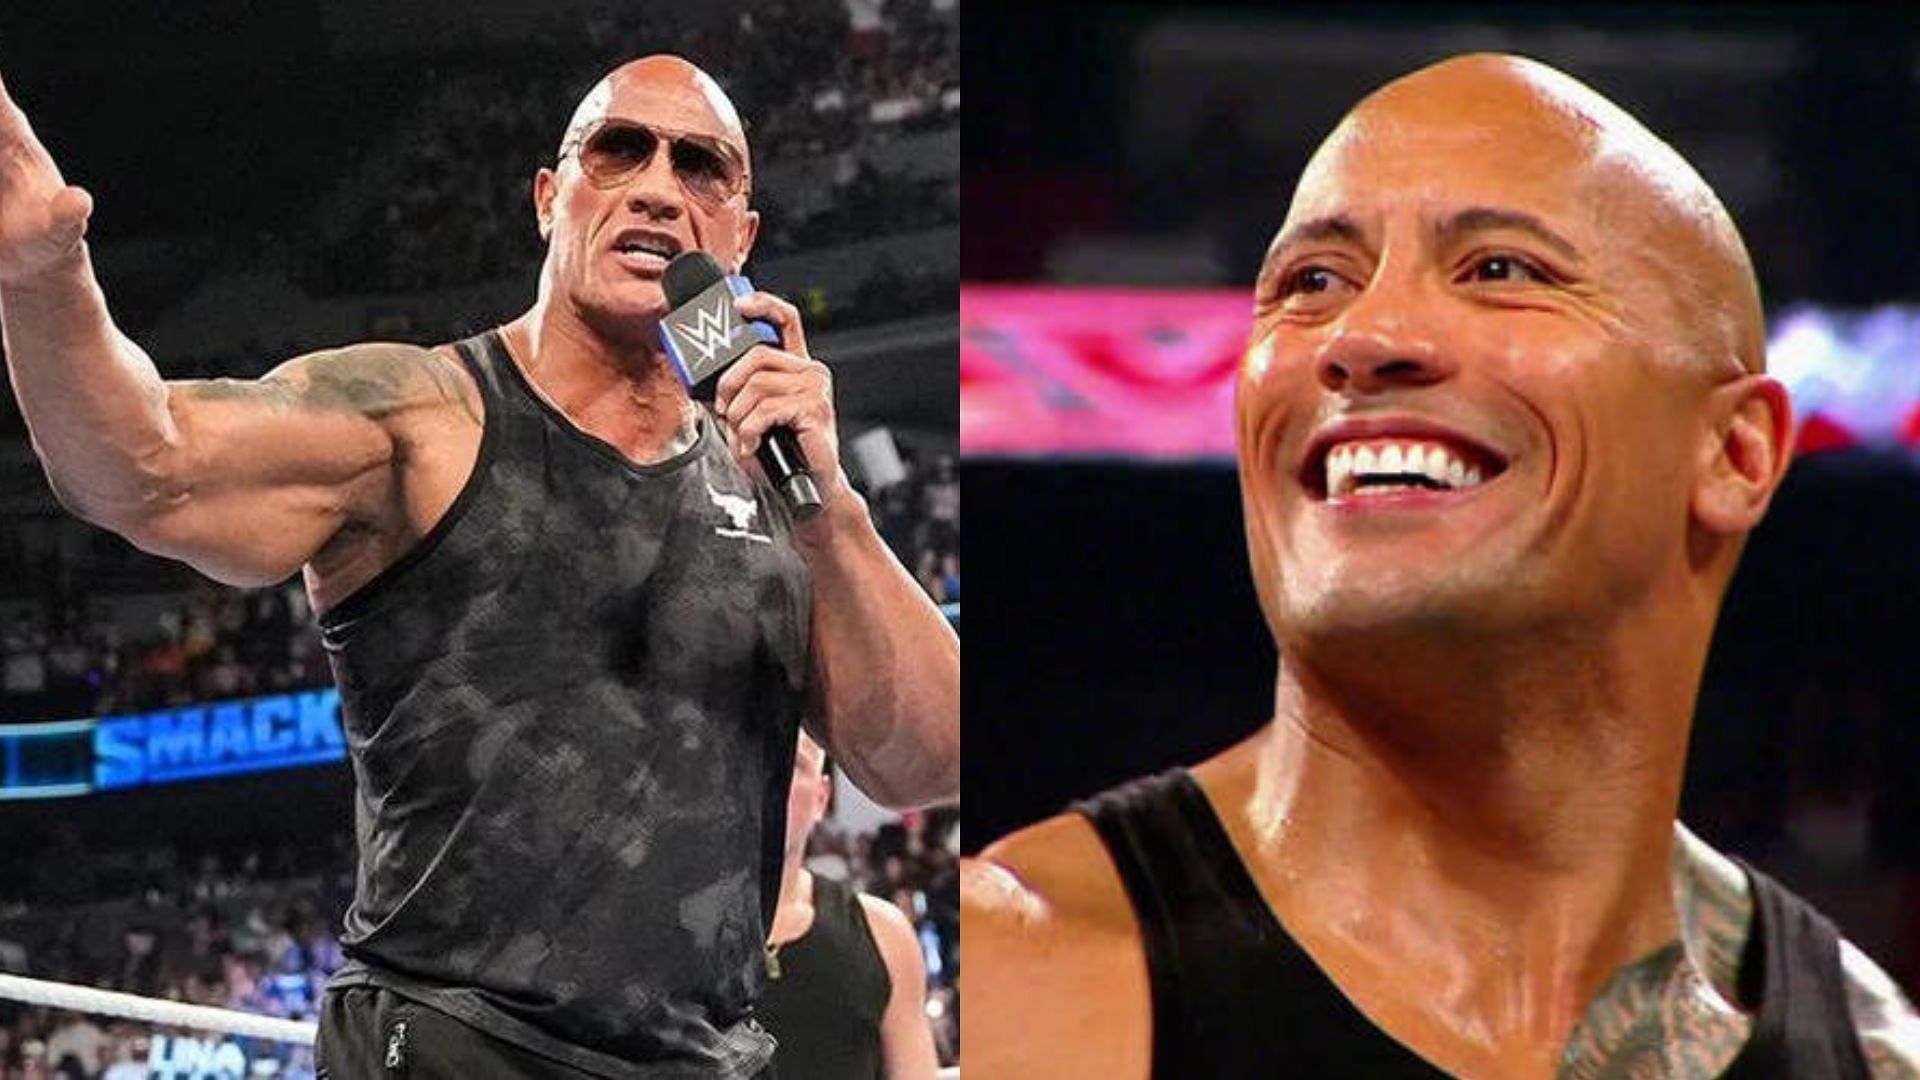 The Rock made a historic return to WWE 